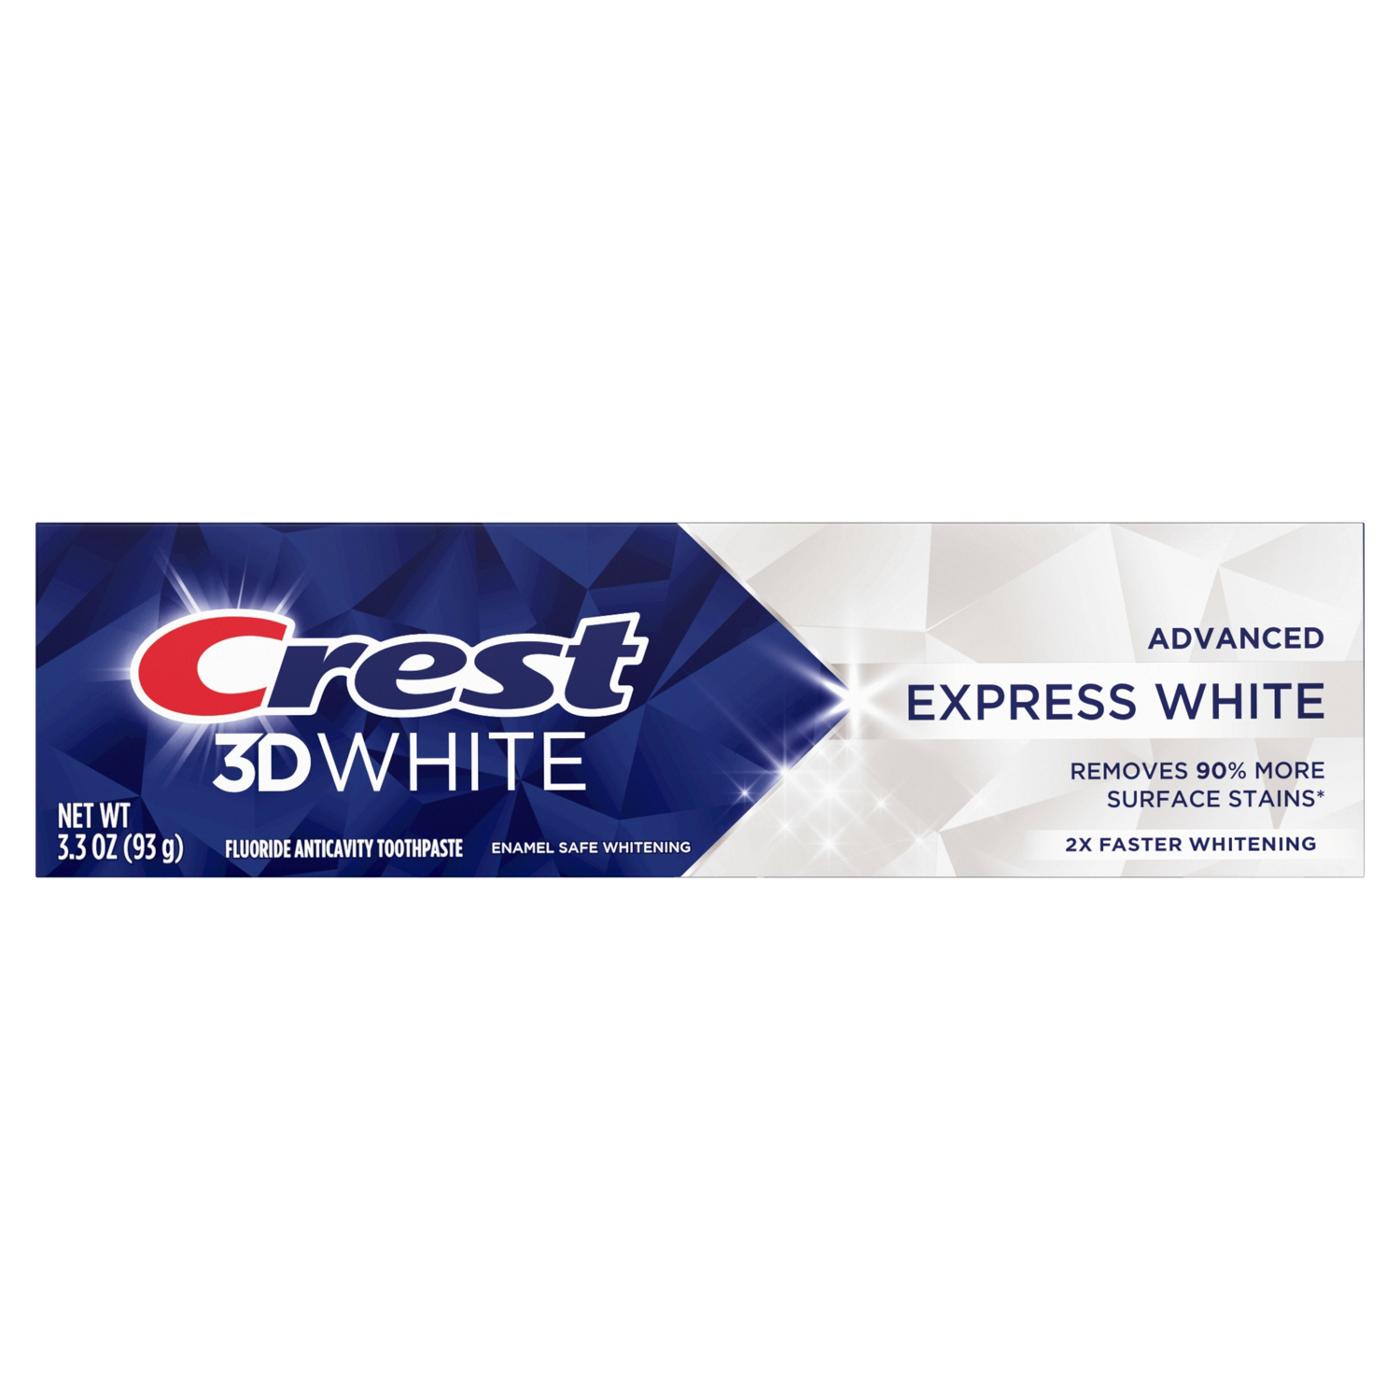 Crest 3D White Advanced Whitening Toothpaste - Express White; image 1 of 16